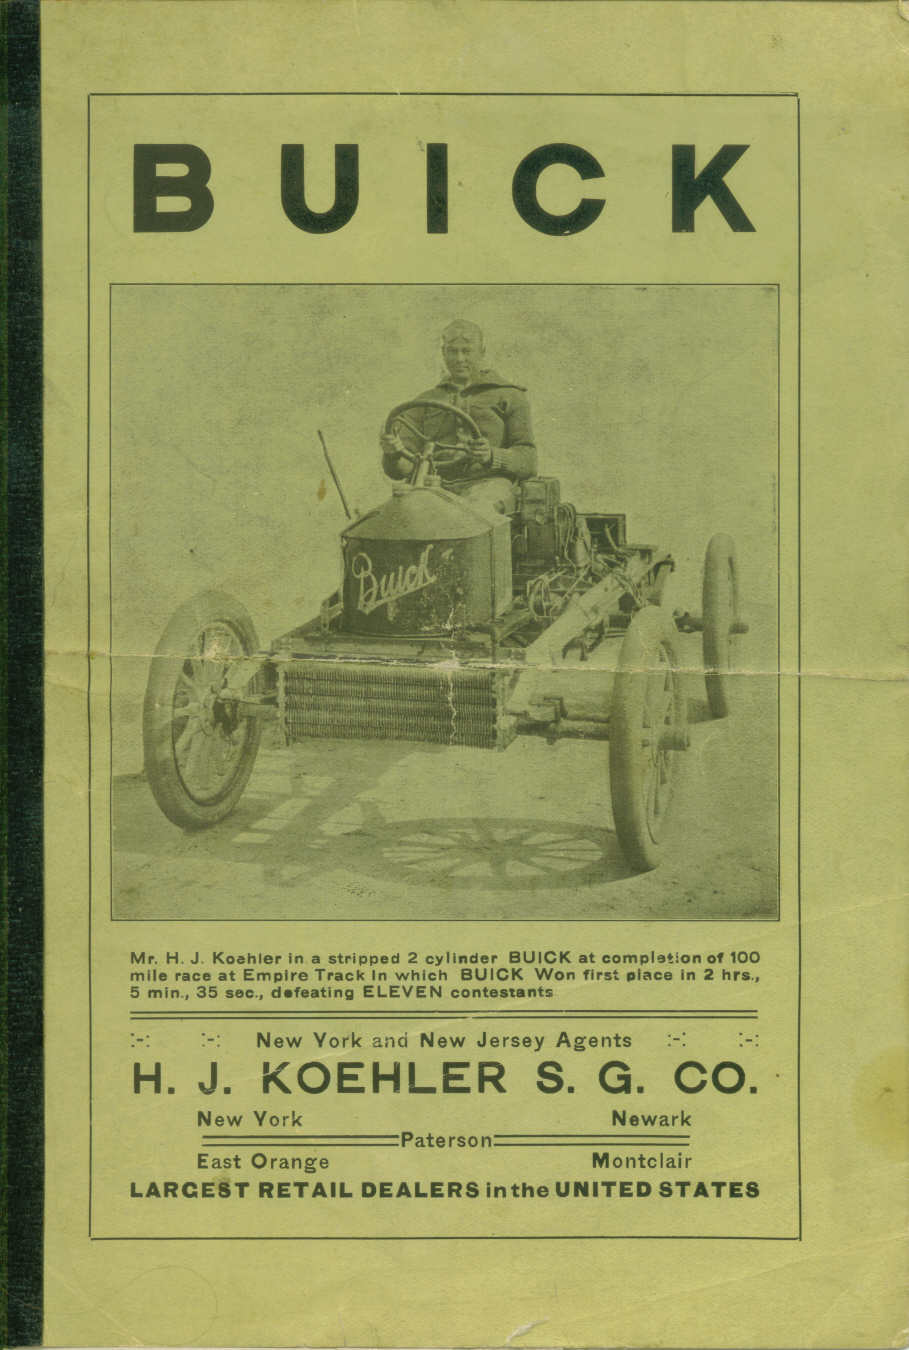 1907 Buick Booklet-01